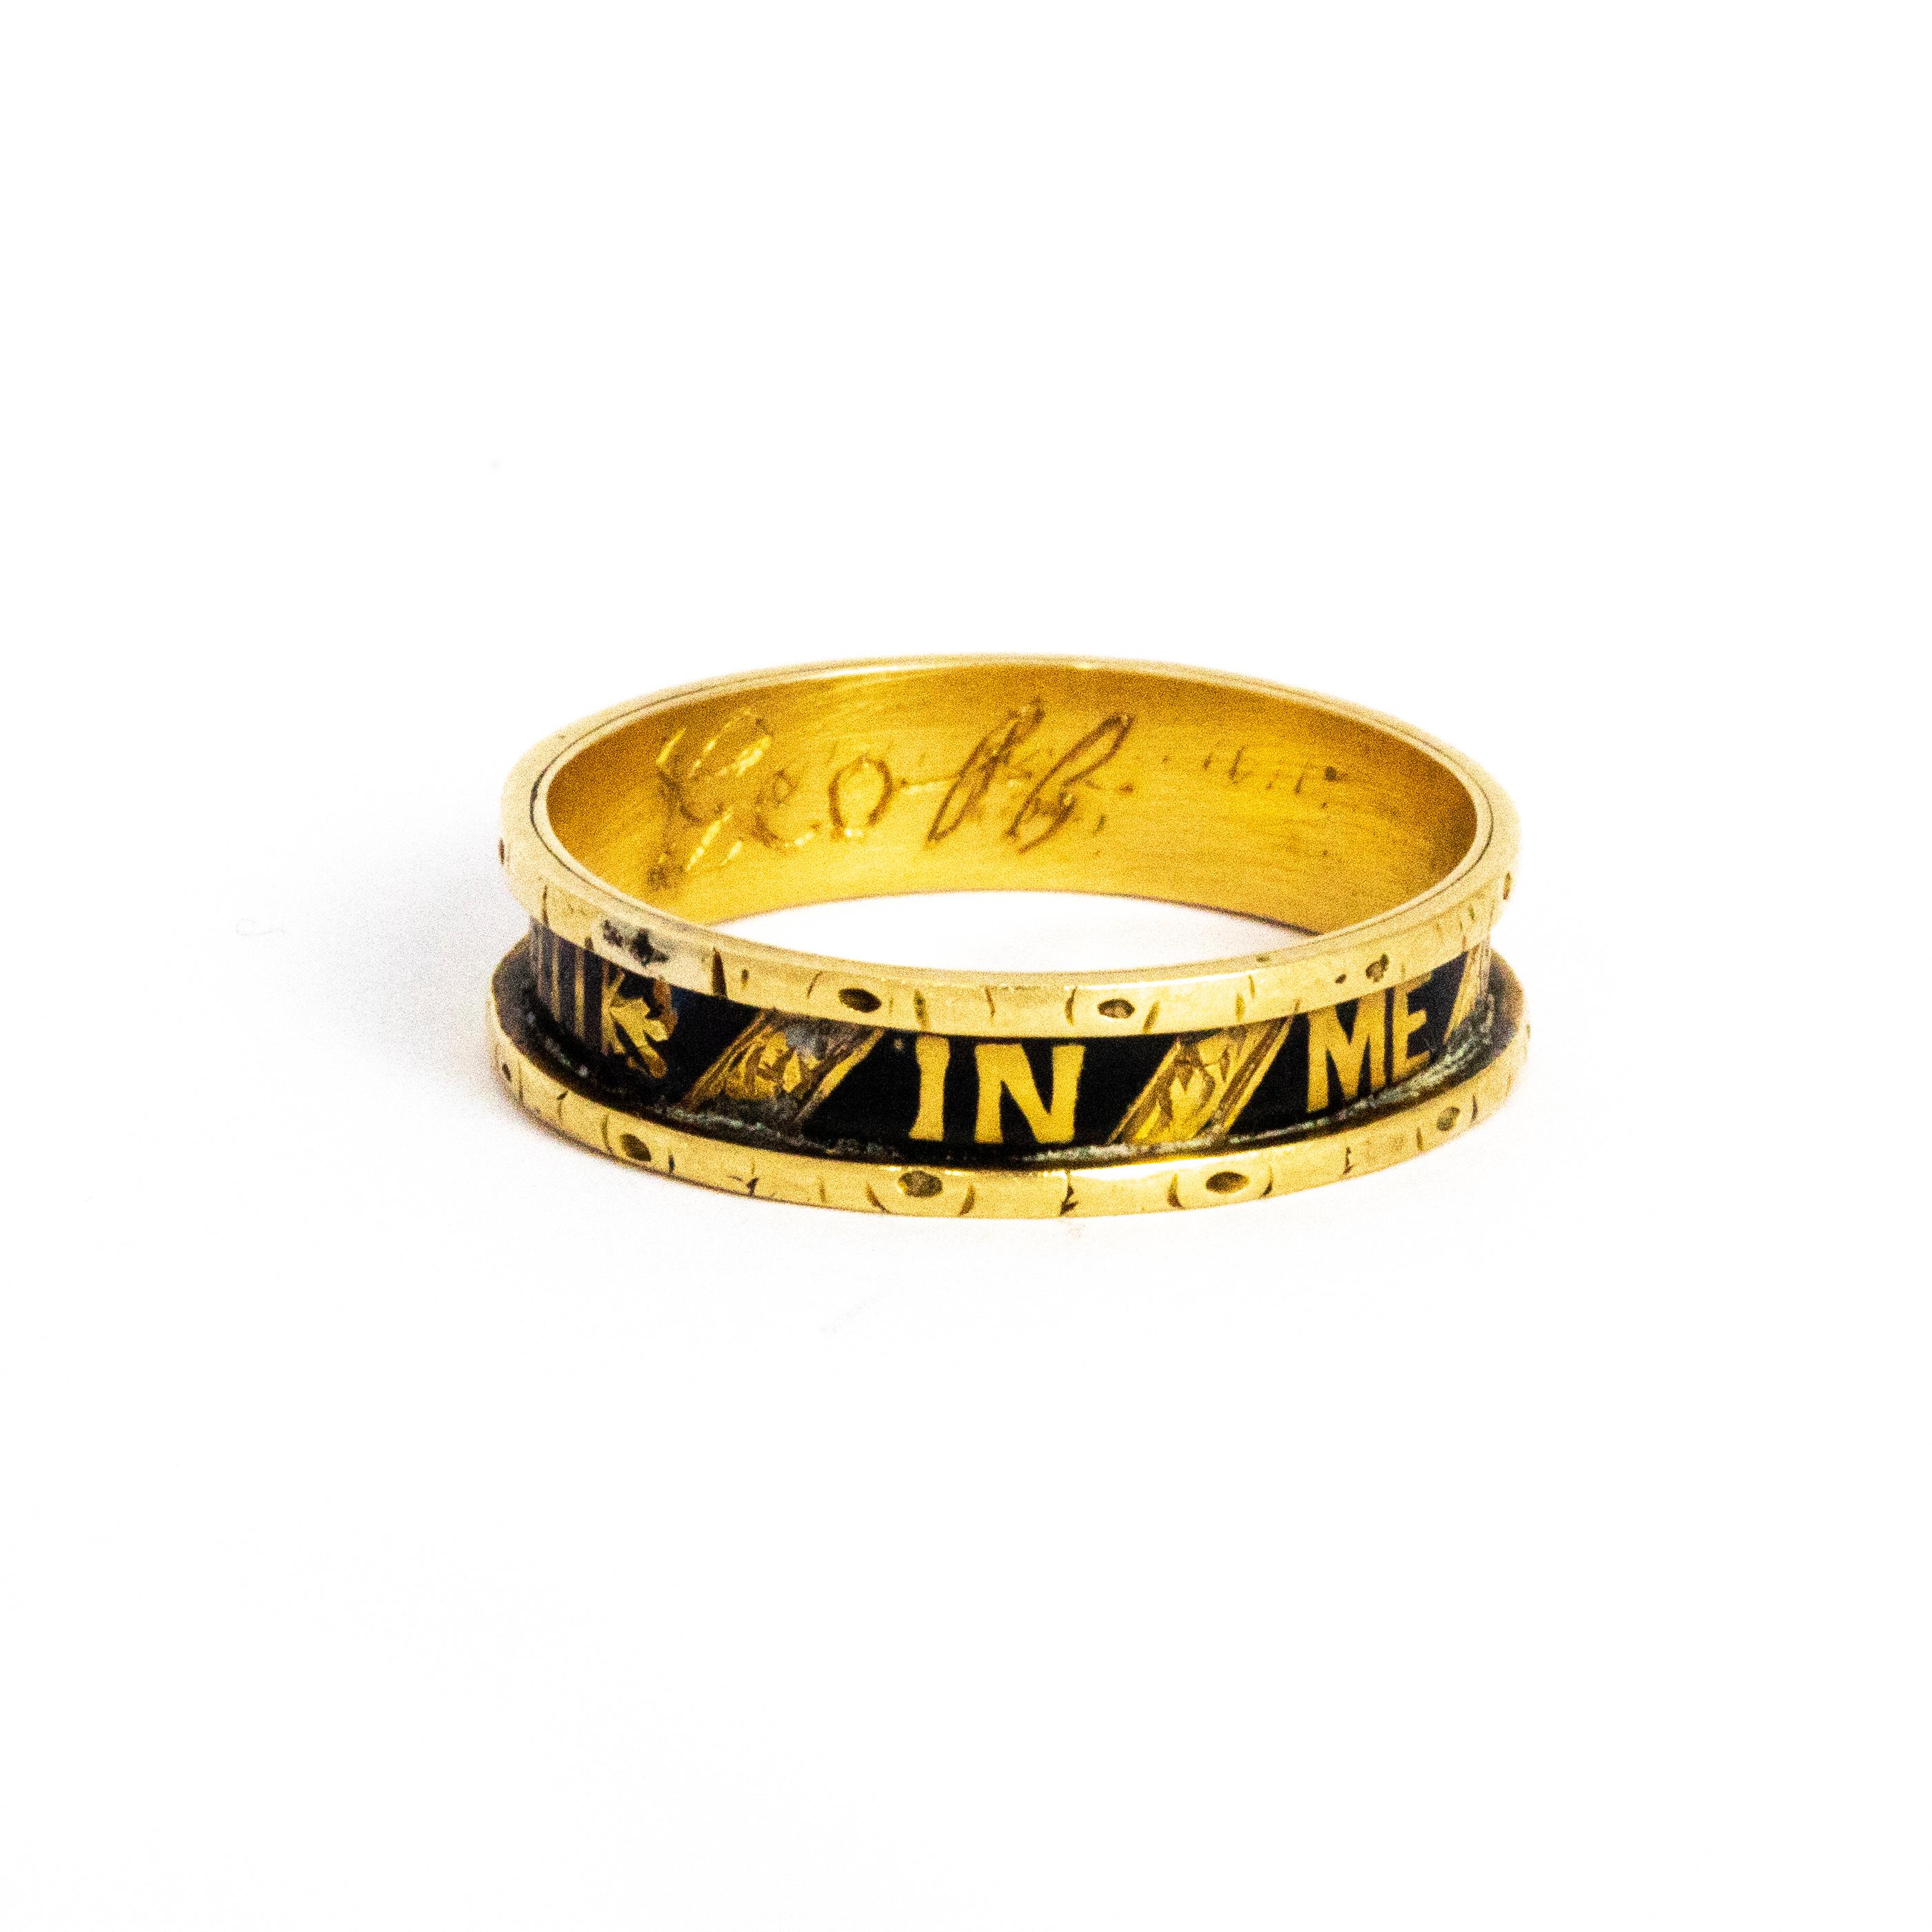 Lovely example of a mid 19th century 'In Memory' band with detailed with black enamel and on the inner band the inscription reads 'Geoff'.

Ring Size: R or 8 1/2